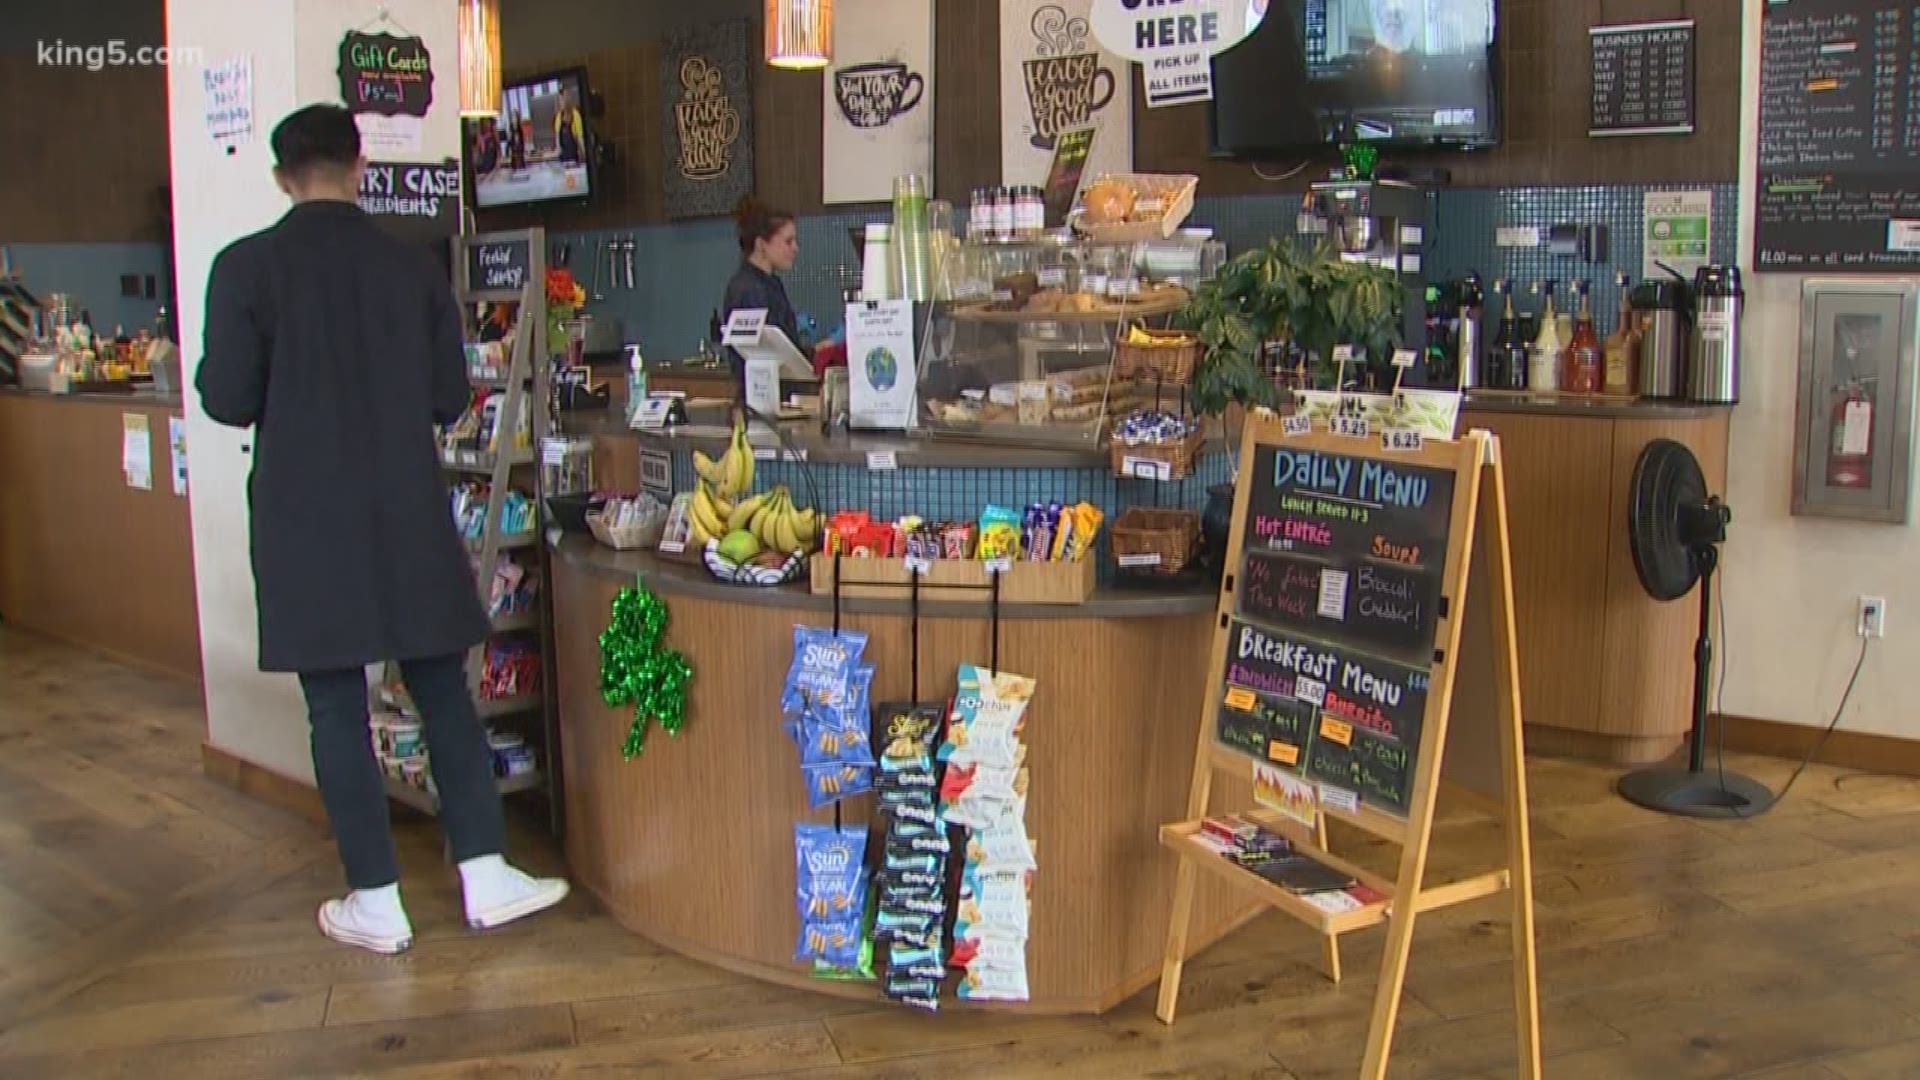 Gov. Inslee has announced programs to help small businesses and their employees impacted by the coronavirus.